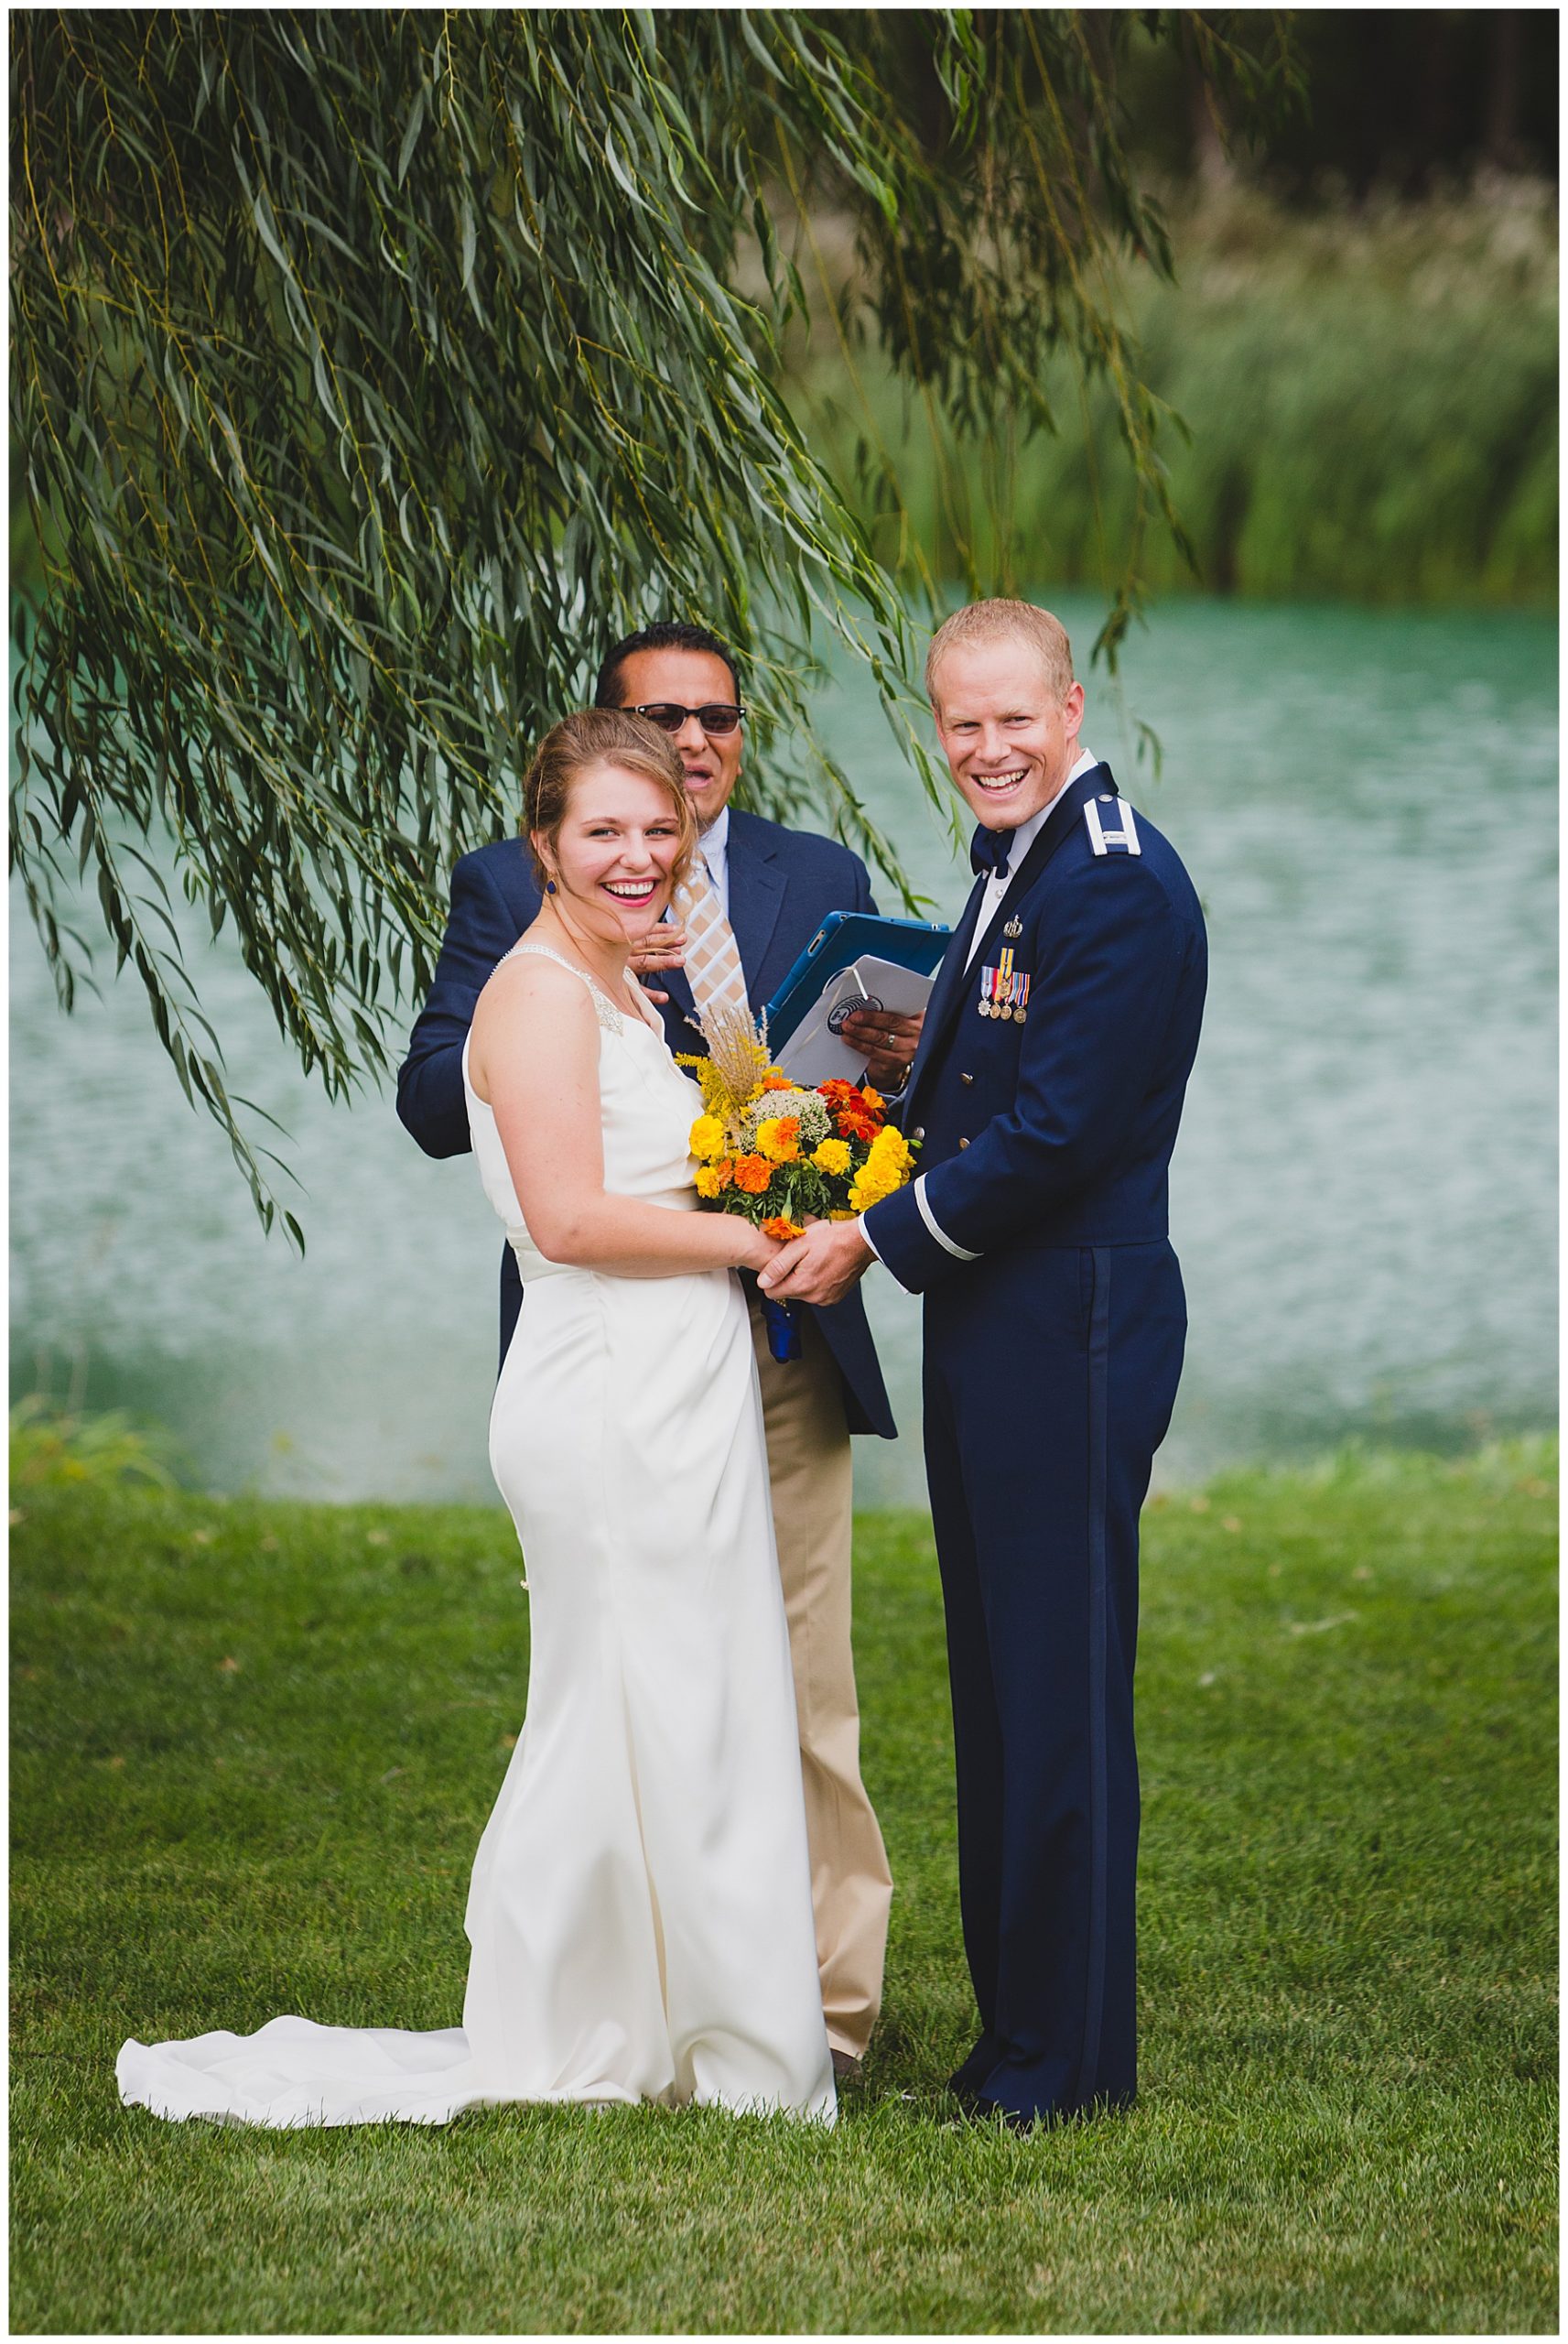 Backyard family wedding,Andrea Bibeault: a wedding photojournalist specializes in real,photojournalistic wedding photography. Based in Omaha,we travel all over the midwest and country.,